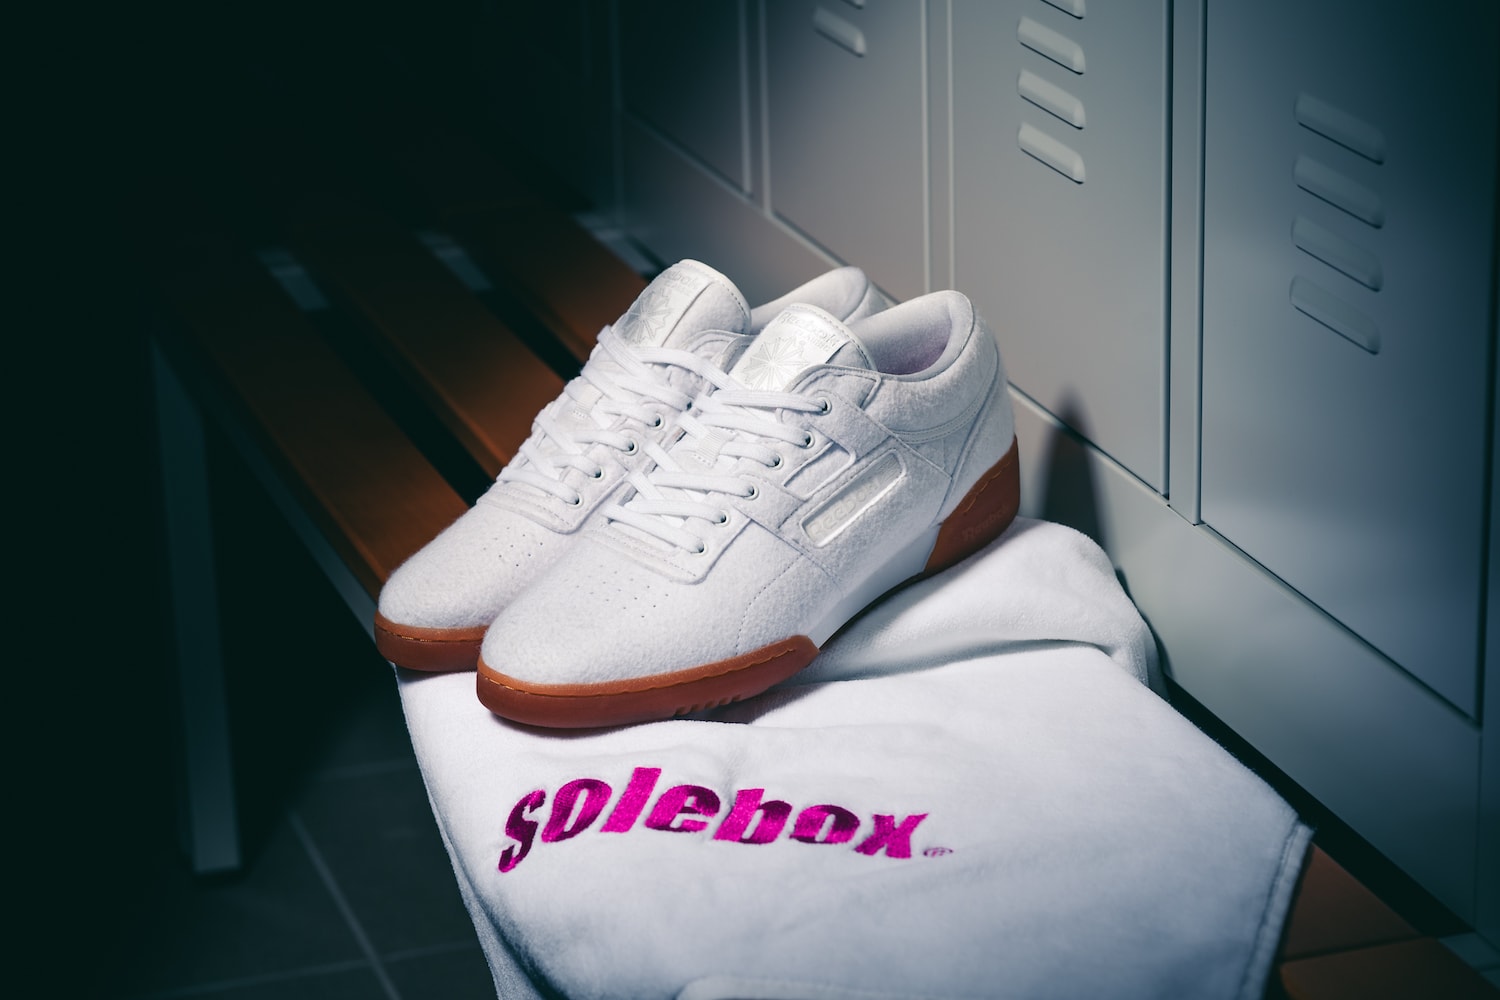 Solebox Reebok Workout Lo Clean Year of Fitness Collaboration 2017 October 7 Release Date Info Sneakers Shoes Footwear